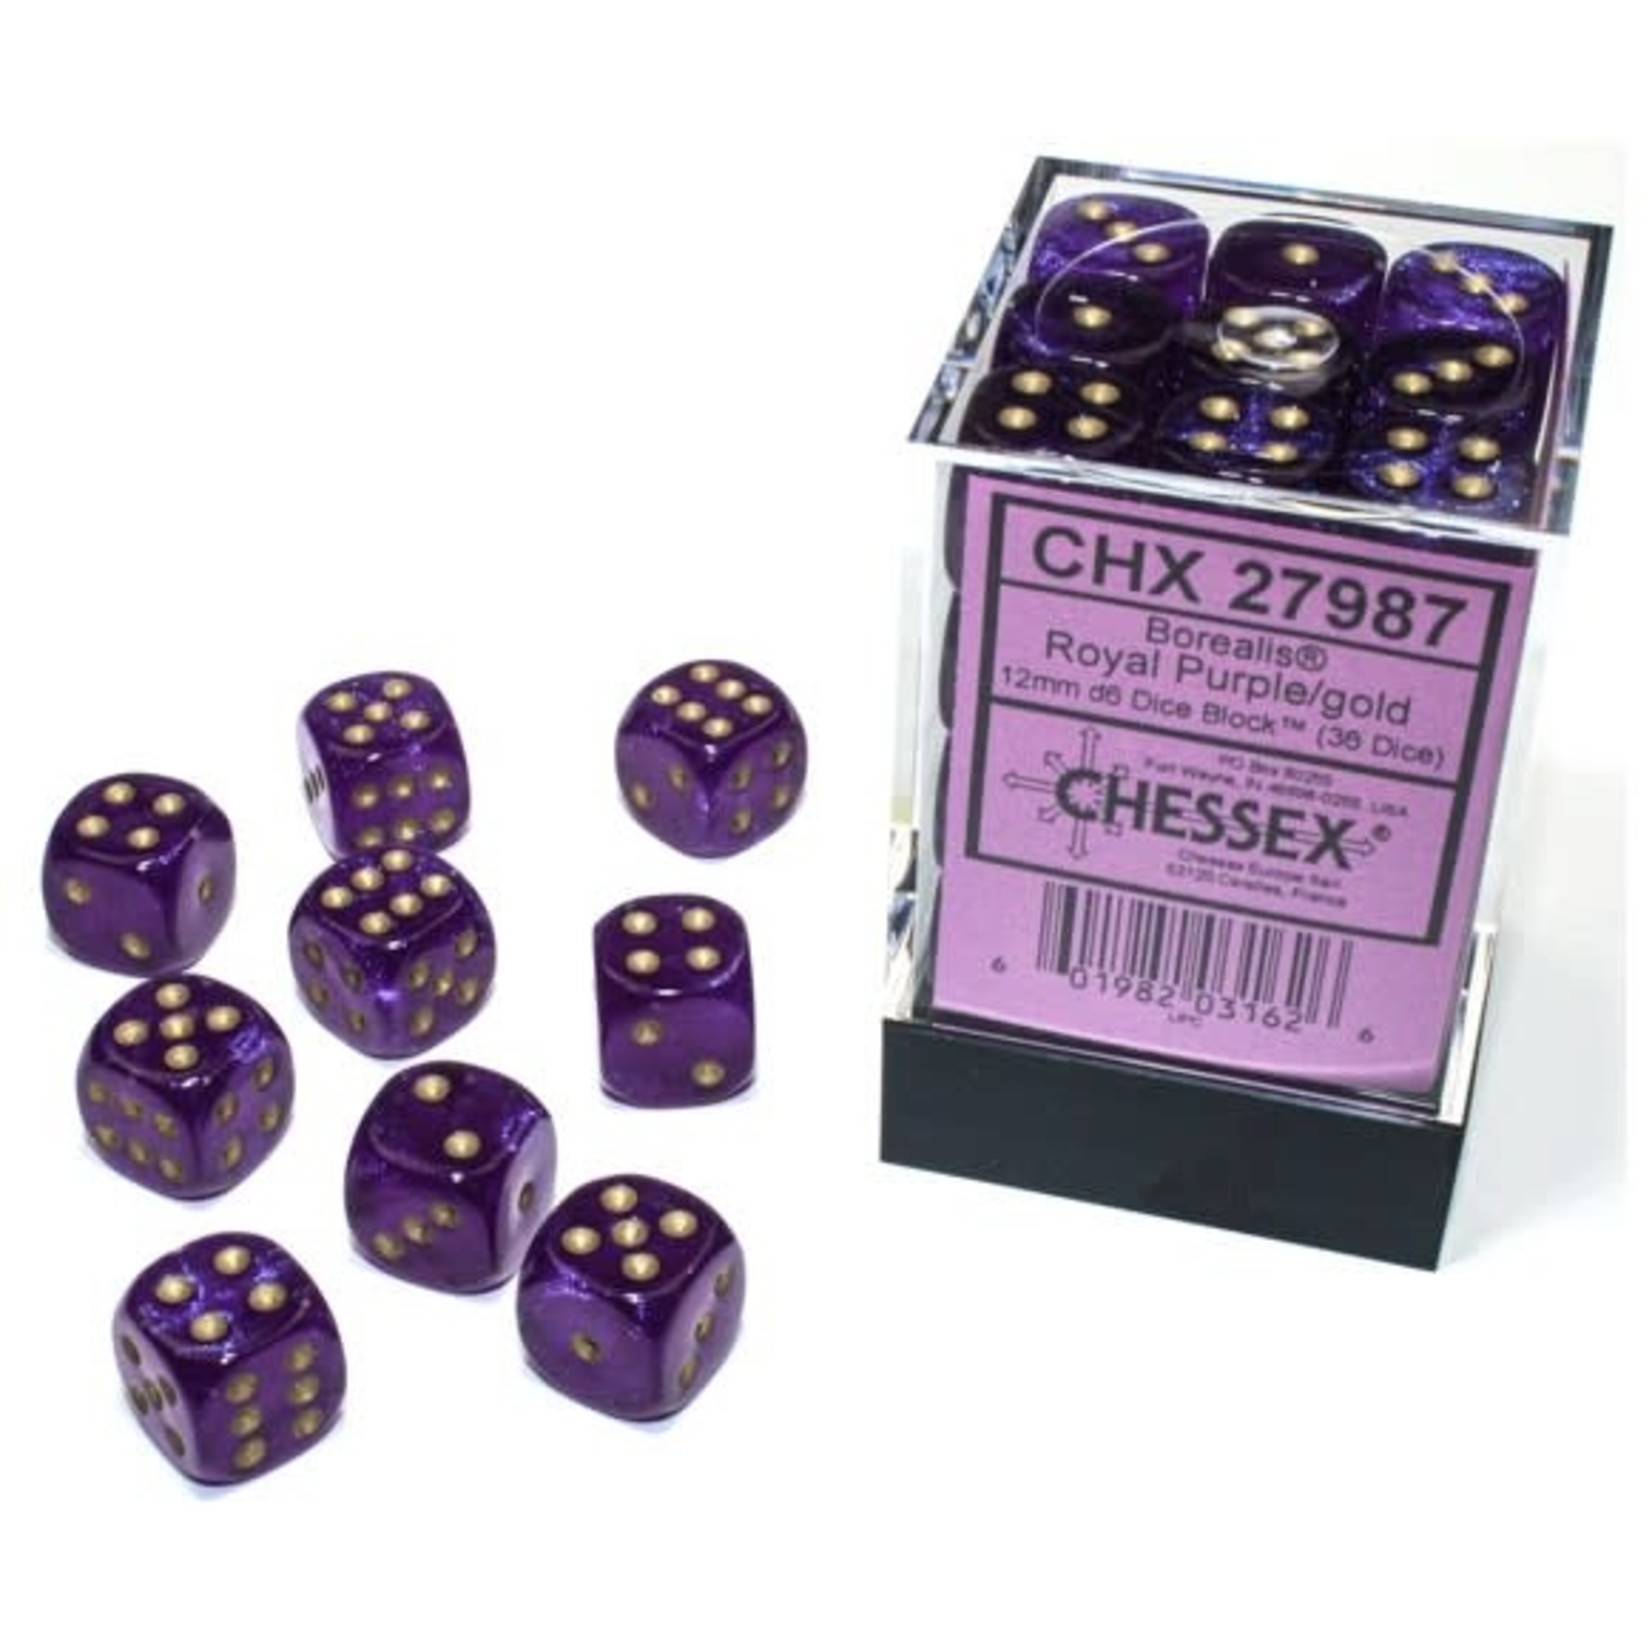 Chessex Chessex Borealis Royal Purple with Gold Luminary 12 mm d6 36 die set